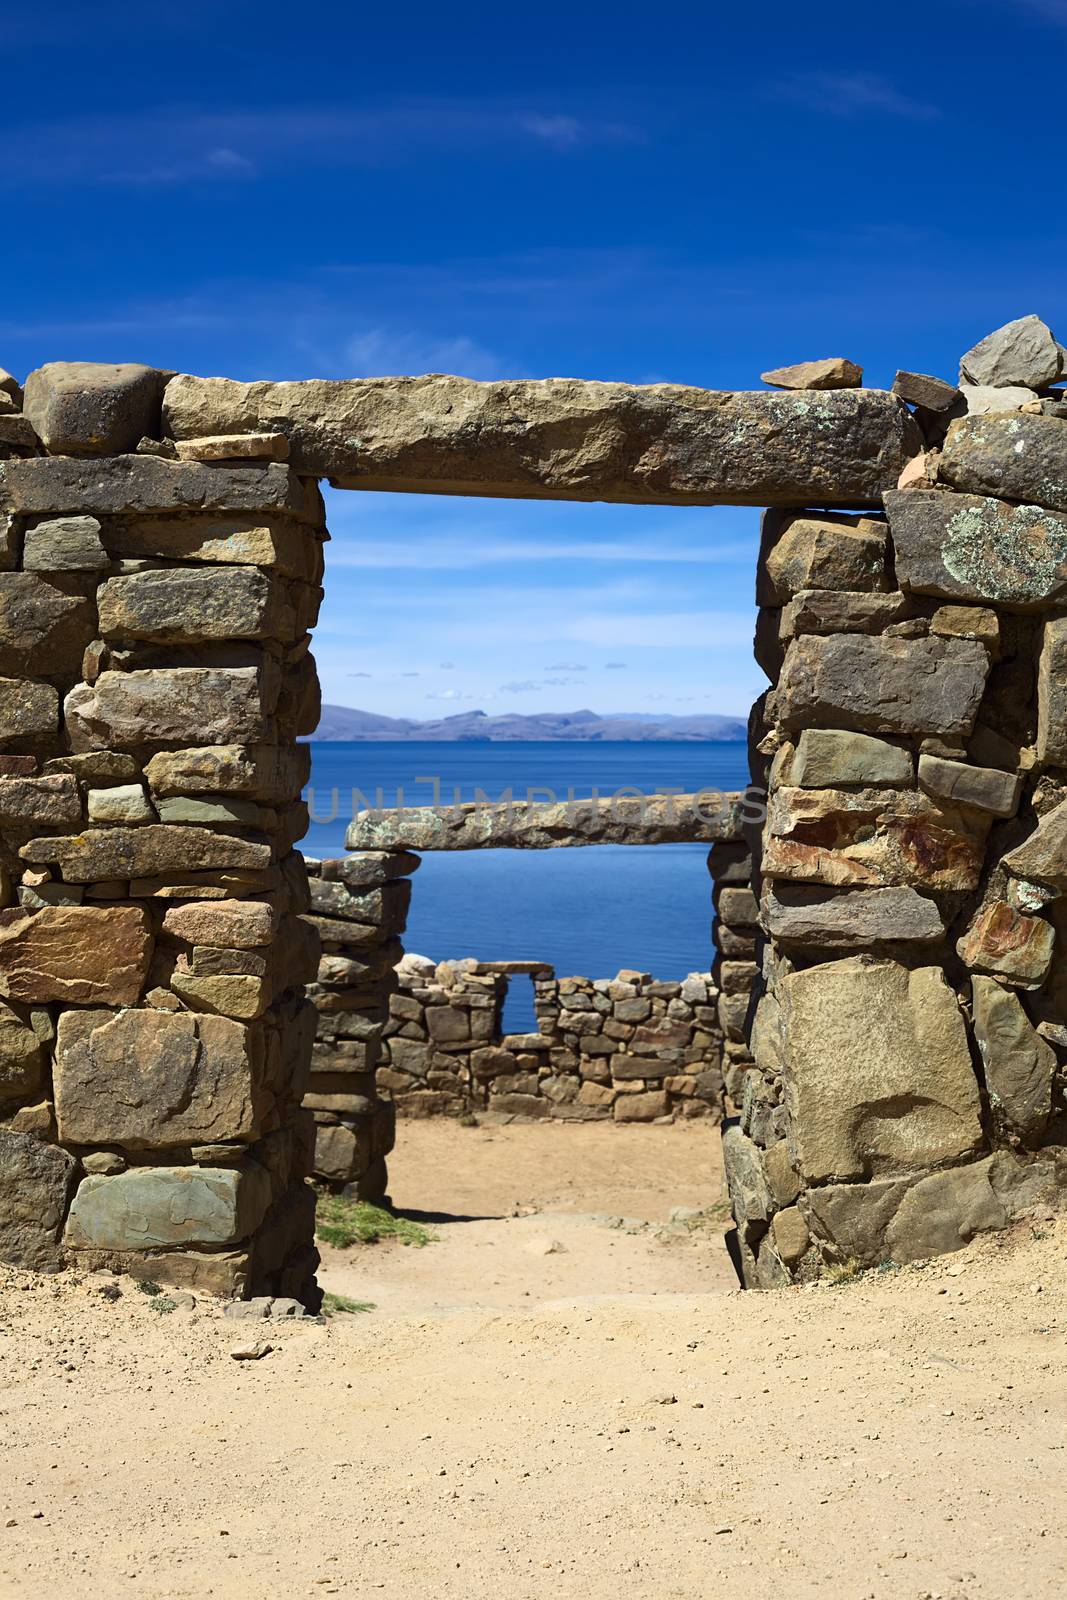 View through a door frame of the Chinkana archeological site of Tiwanaku (Tiahuanaco) origin on the Northwestern part of the Isla del Sol (Island of the Sun) in Lake Titicaca in Bolivia. Isla del Sol is a popular tourist destination and is reachable by boat from Copacabana, Bolivia. (Selective Focus, Focus on the first door frame)